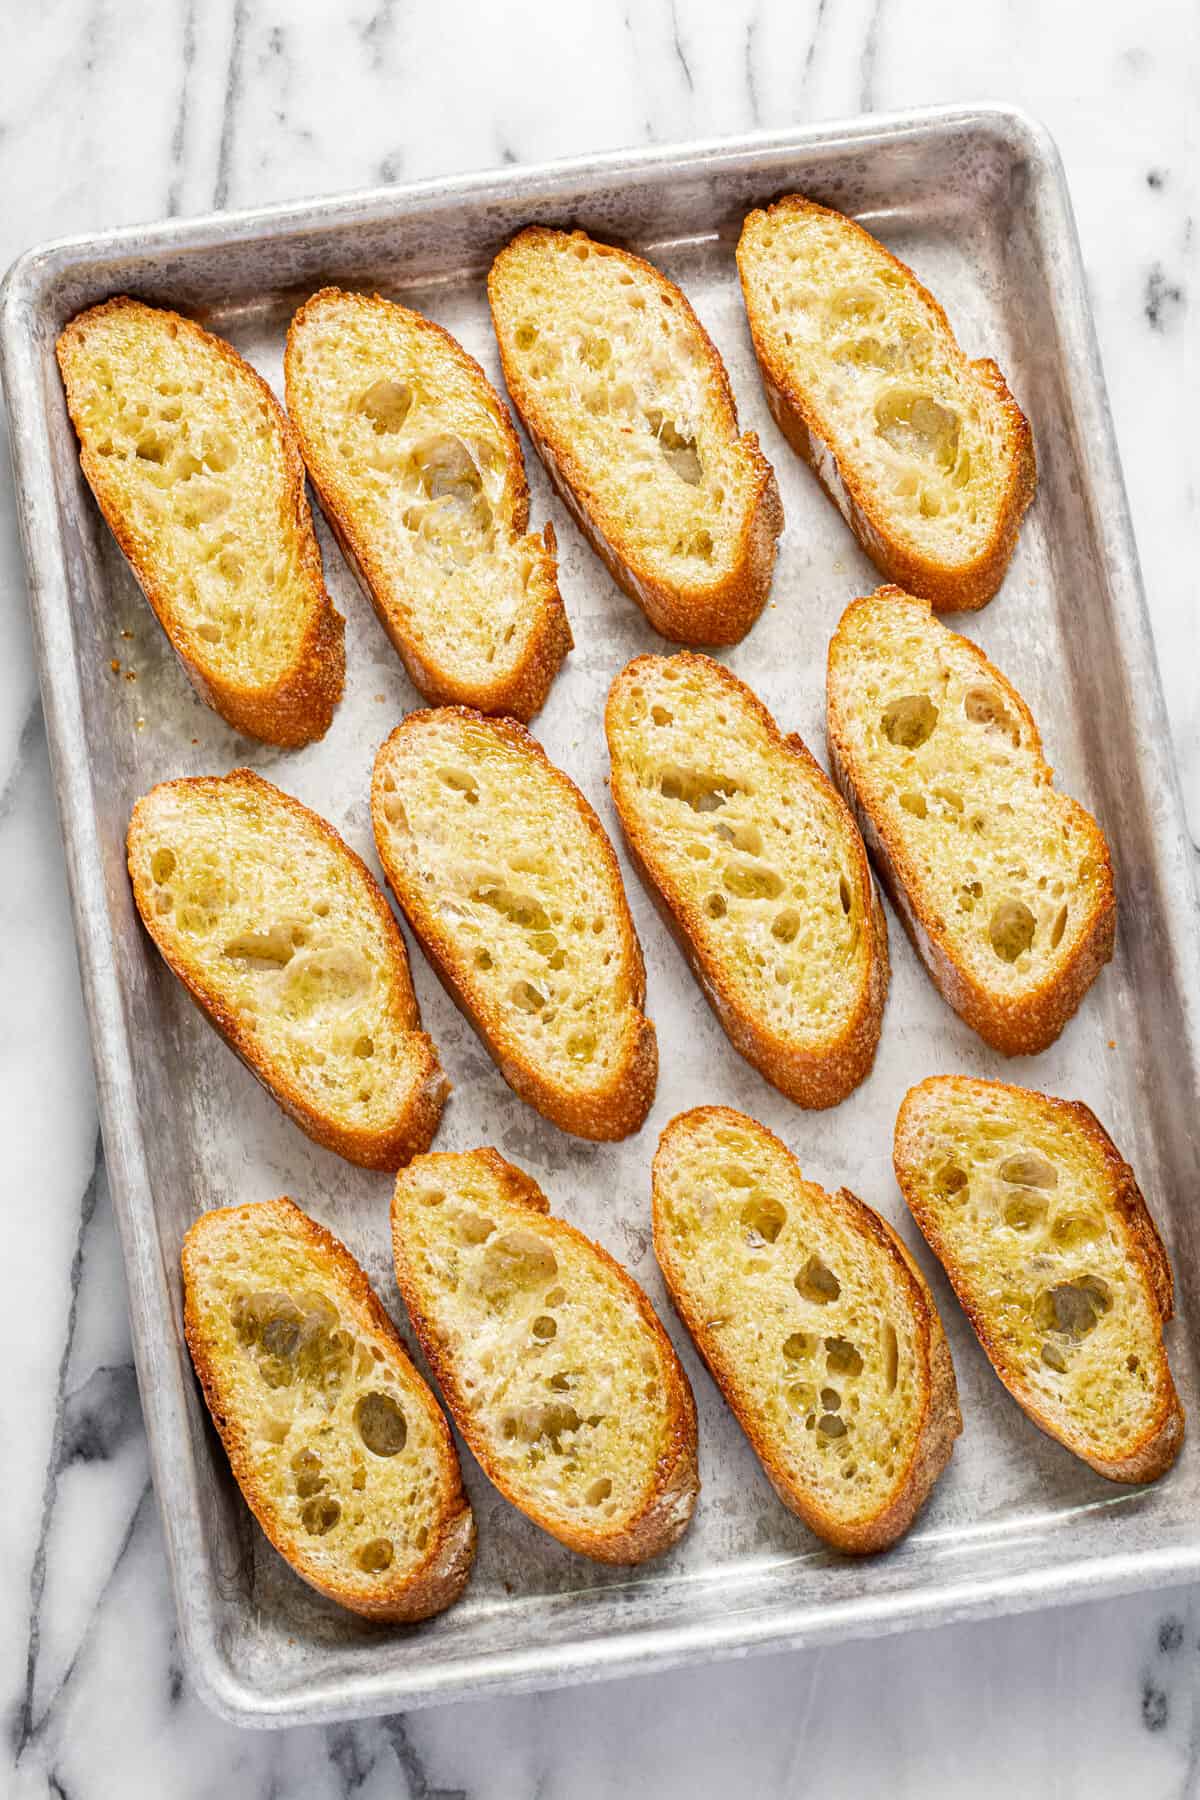 Sliced French bread brushed with olive oil on a baking sheet.